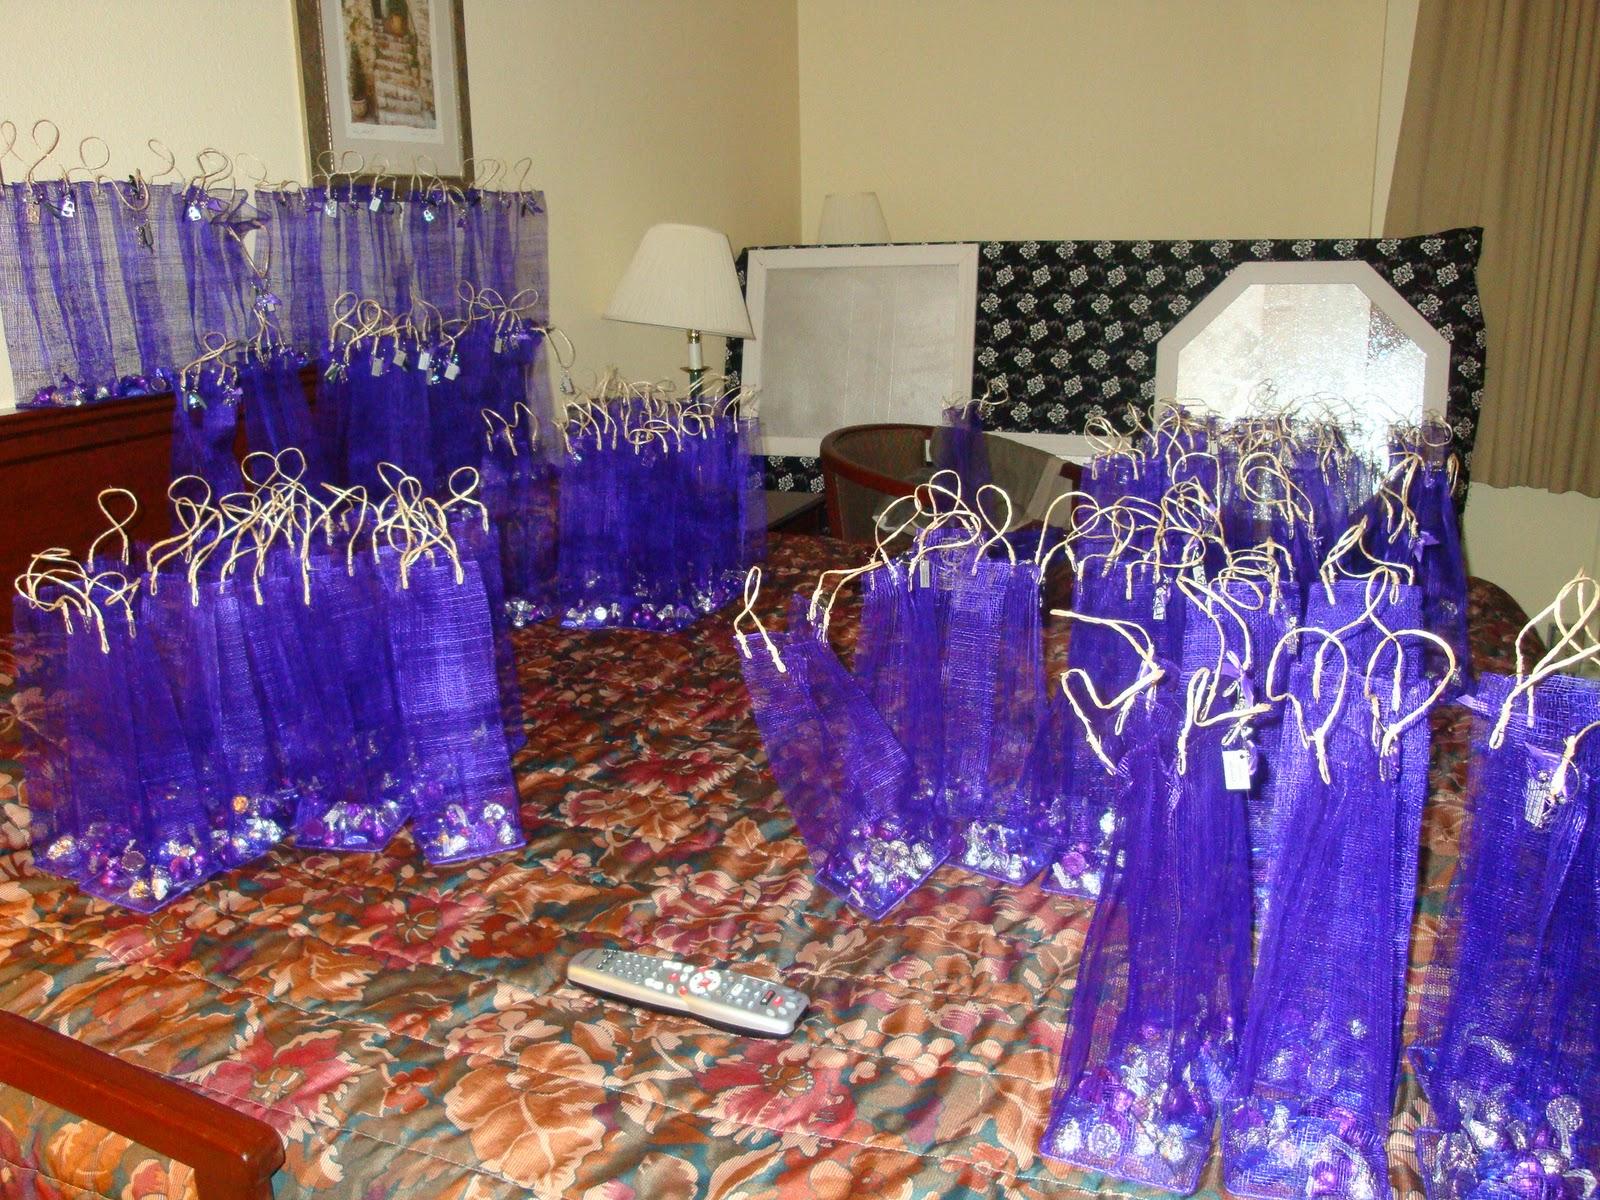 Our wine bag wedding favors,